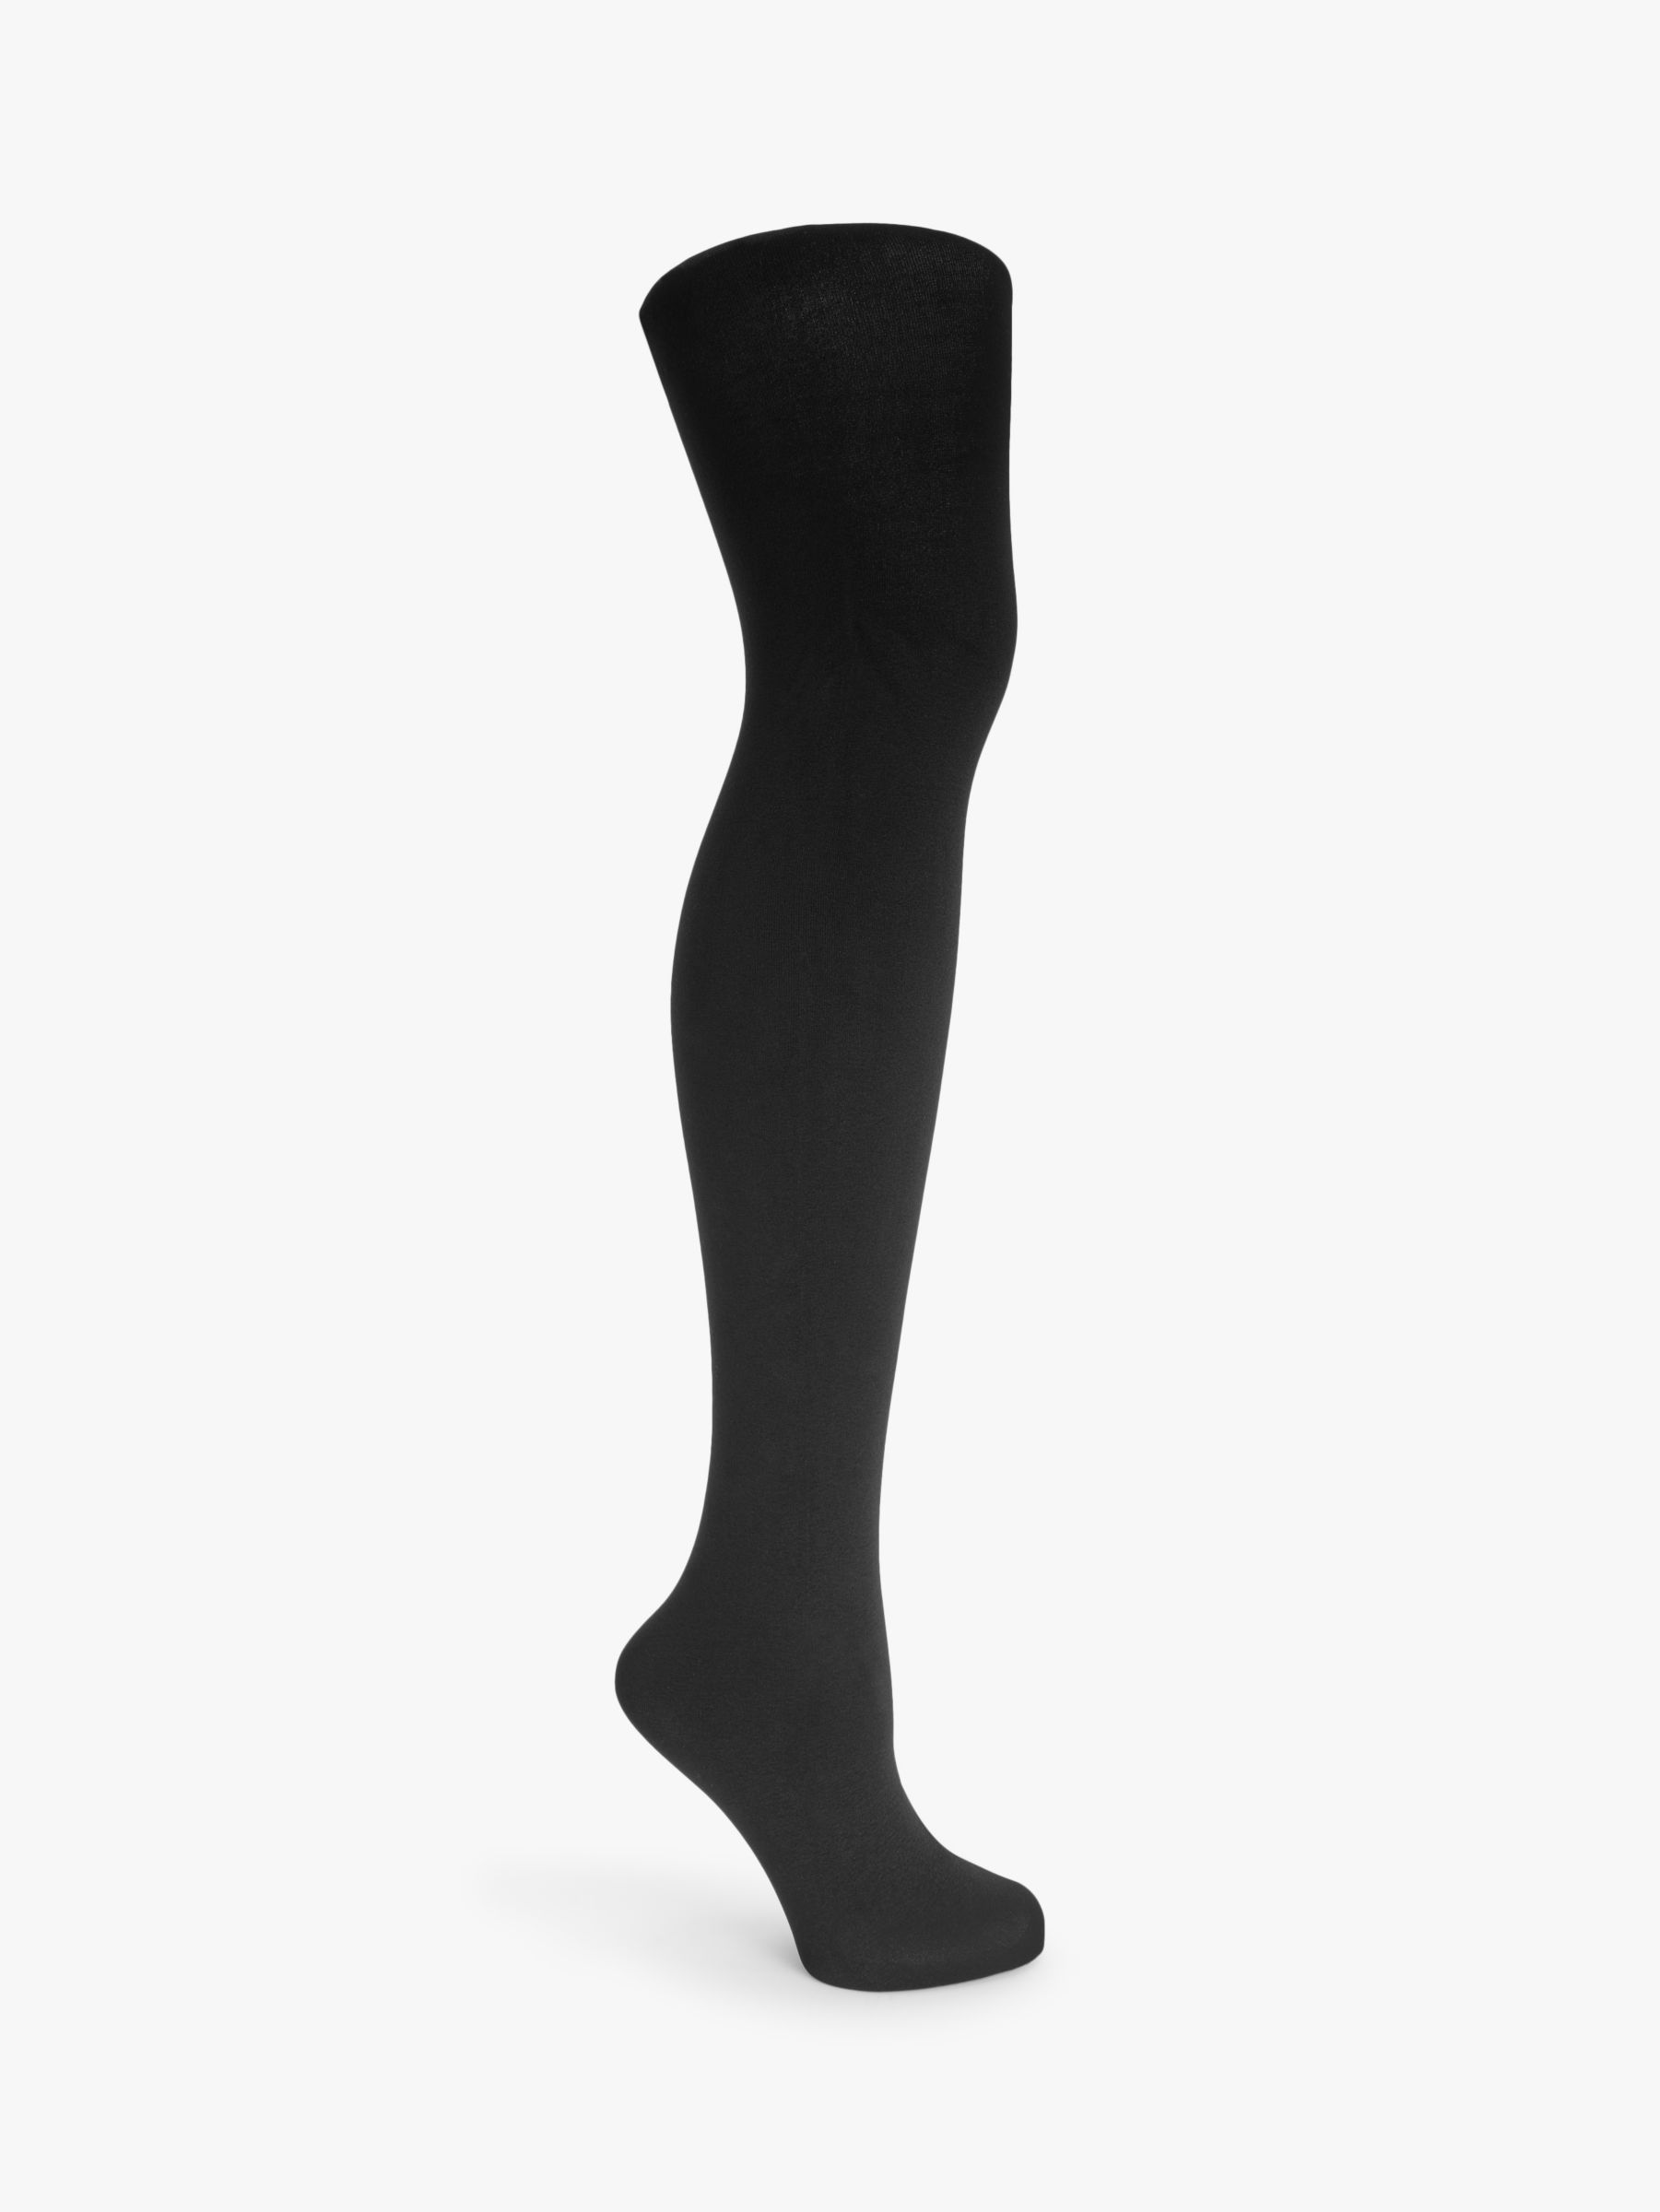 Couture Black Opaque Tights Glitter, Body Shaping, Comfort, Blackout 40-100  Denier